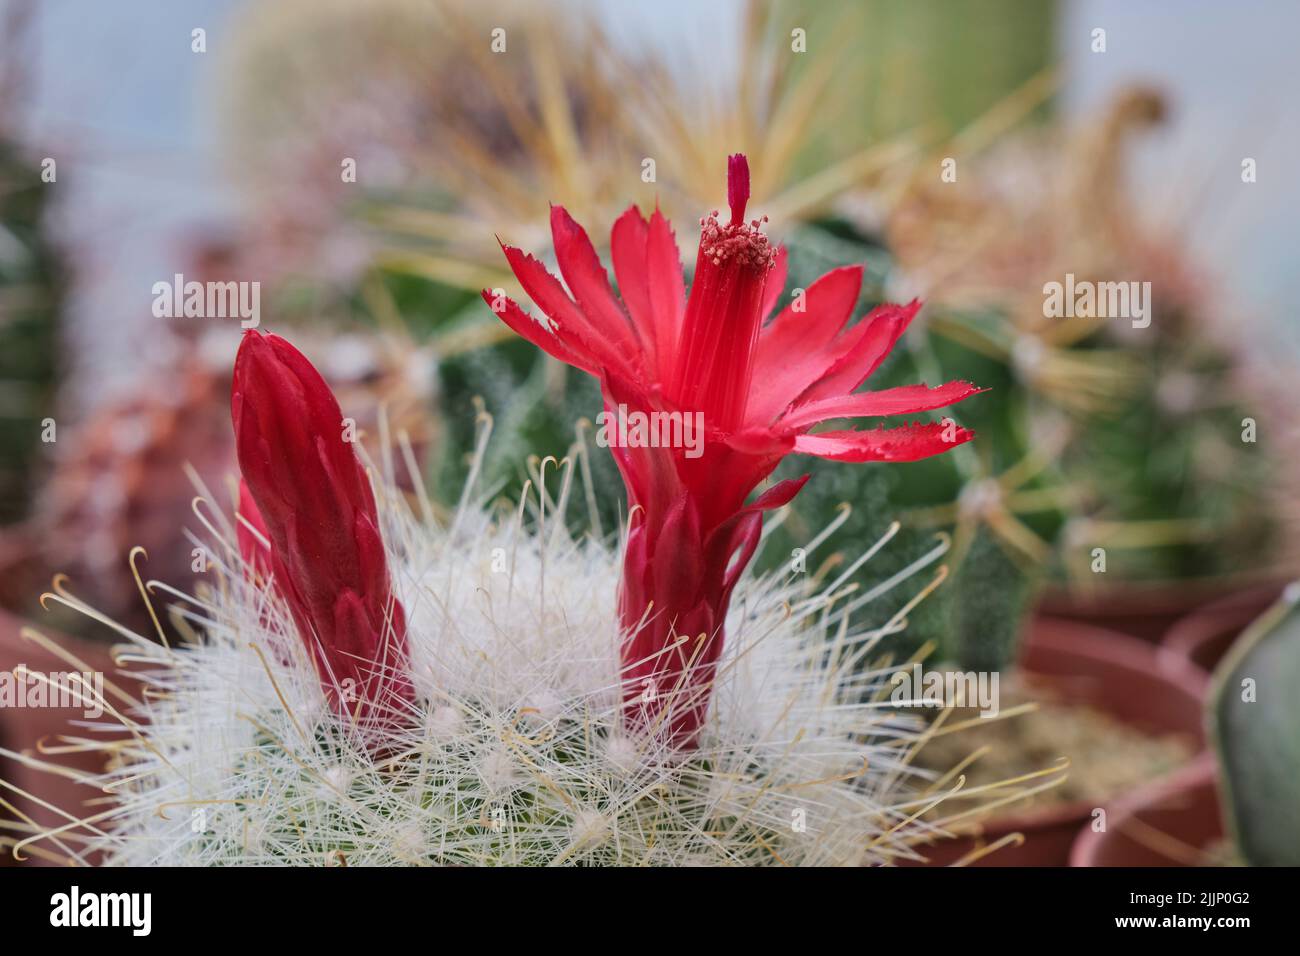 Closeup of colorful red flower growing on cactus with white spikes in light room against blurred background during blooming season Stock Photo